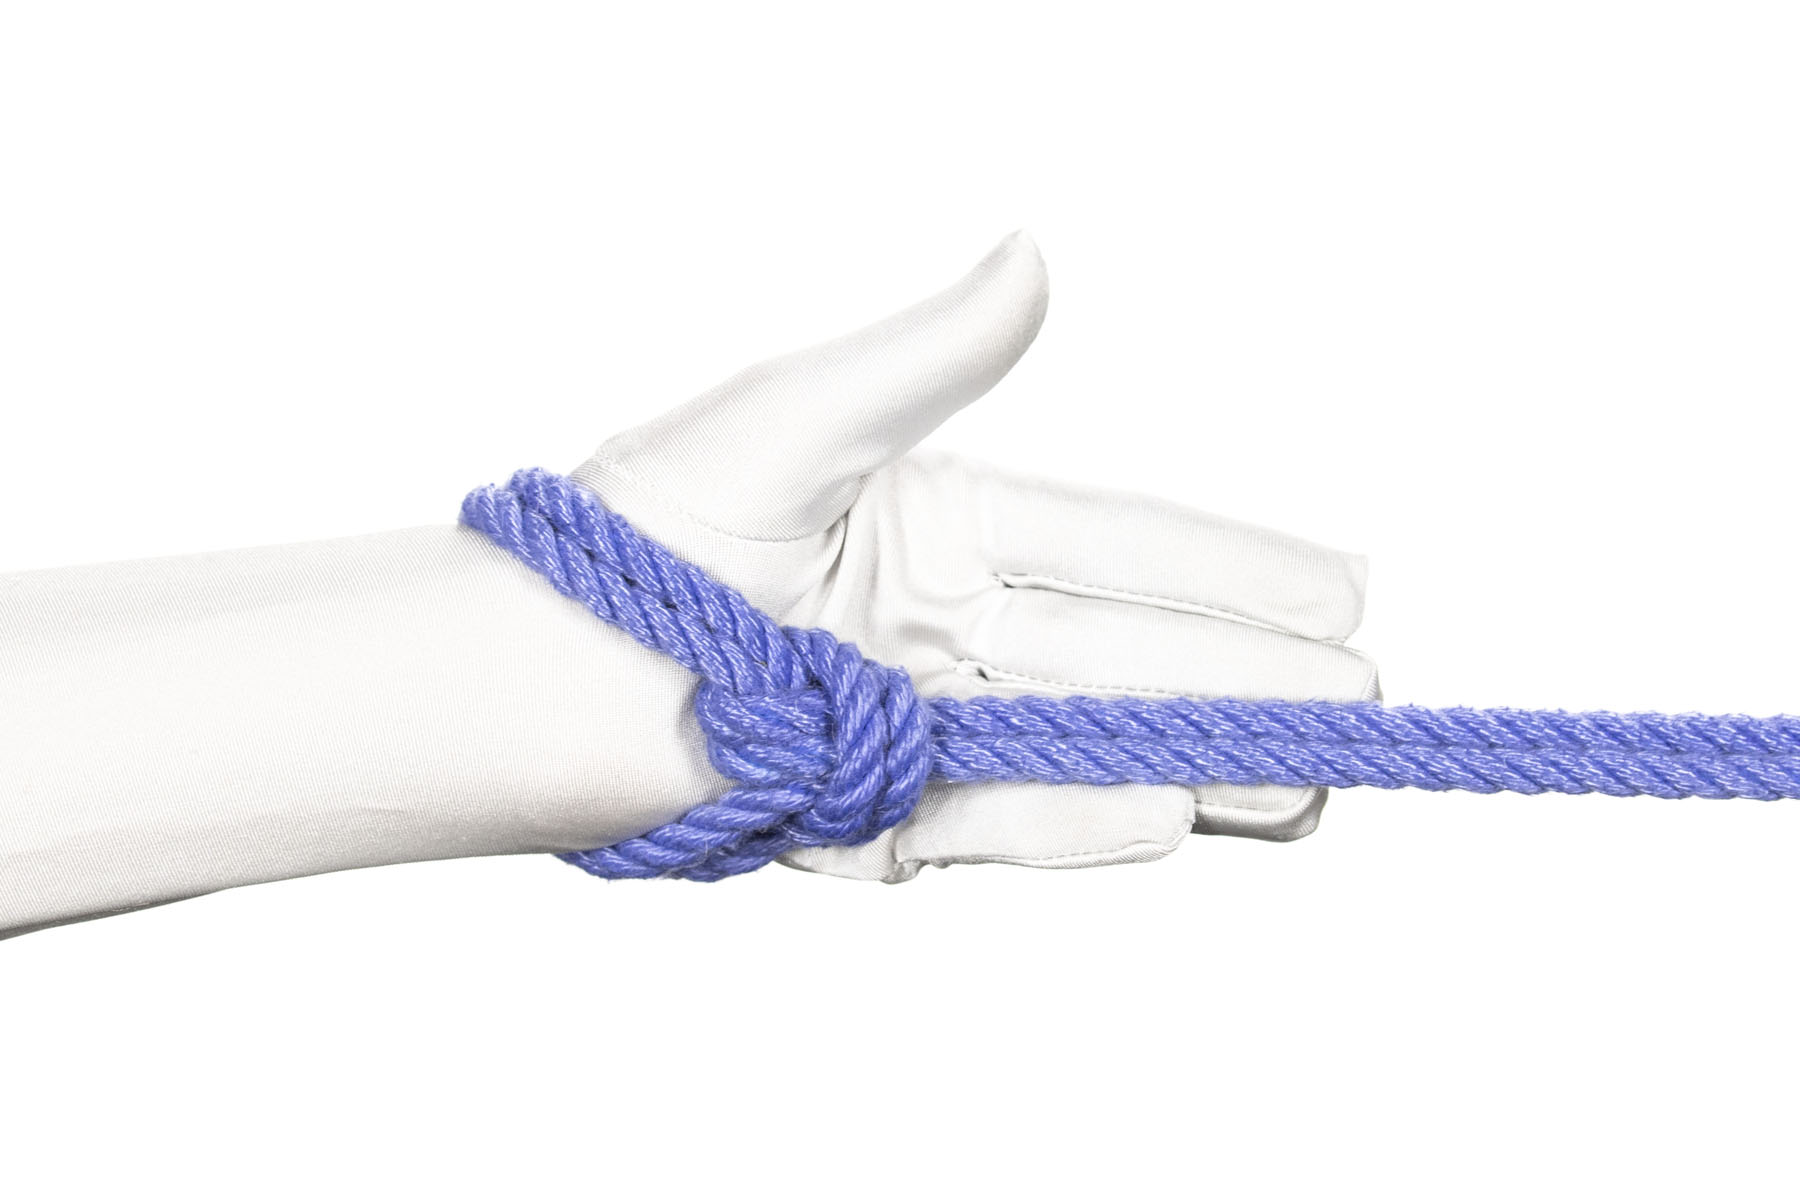 A hand is tied by a single column tie with only one double wrap around the wrist. The single column has been tied loosely, so that the knot lies in the palm of the hand.